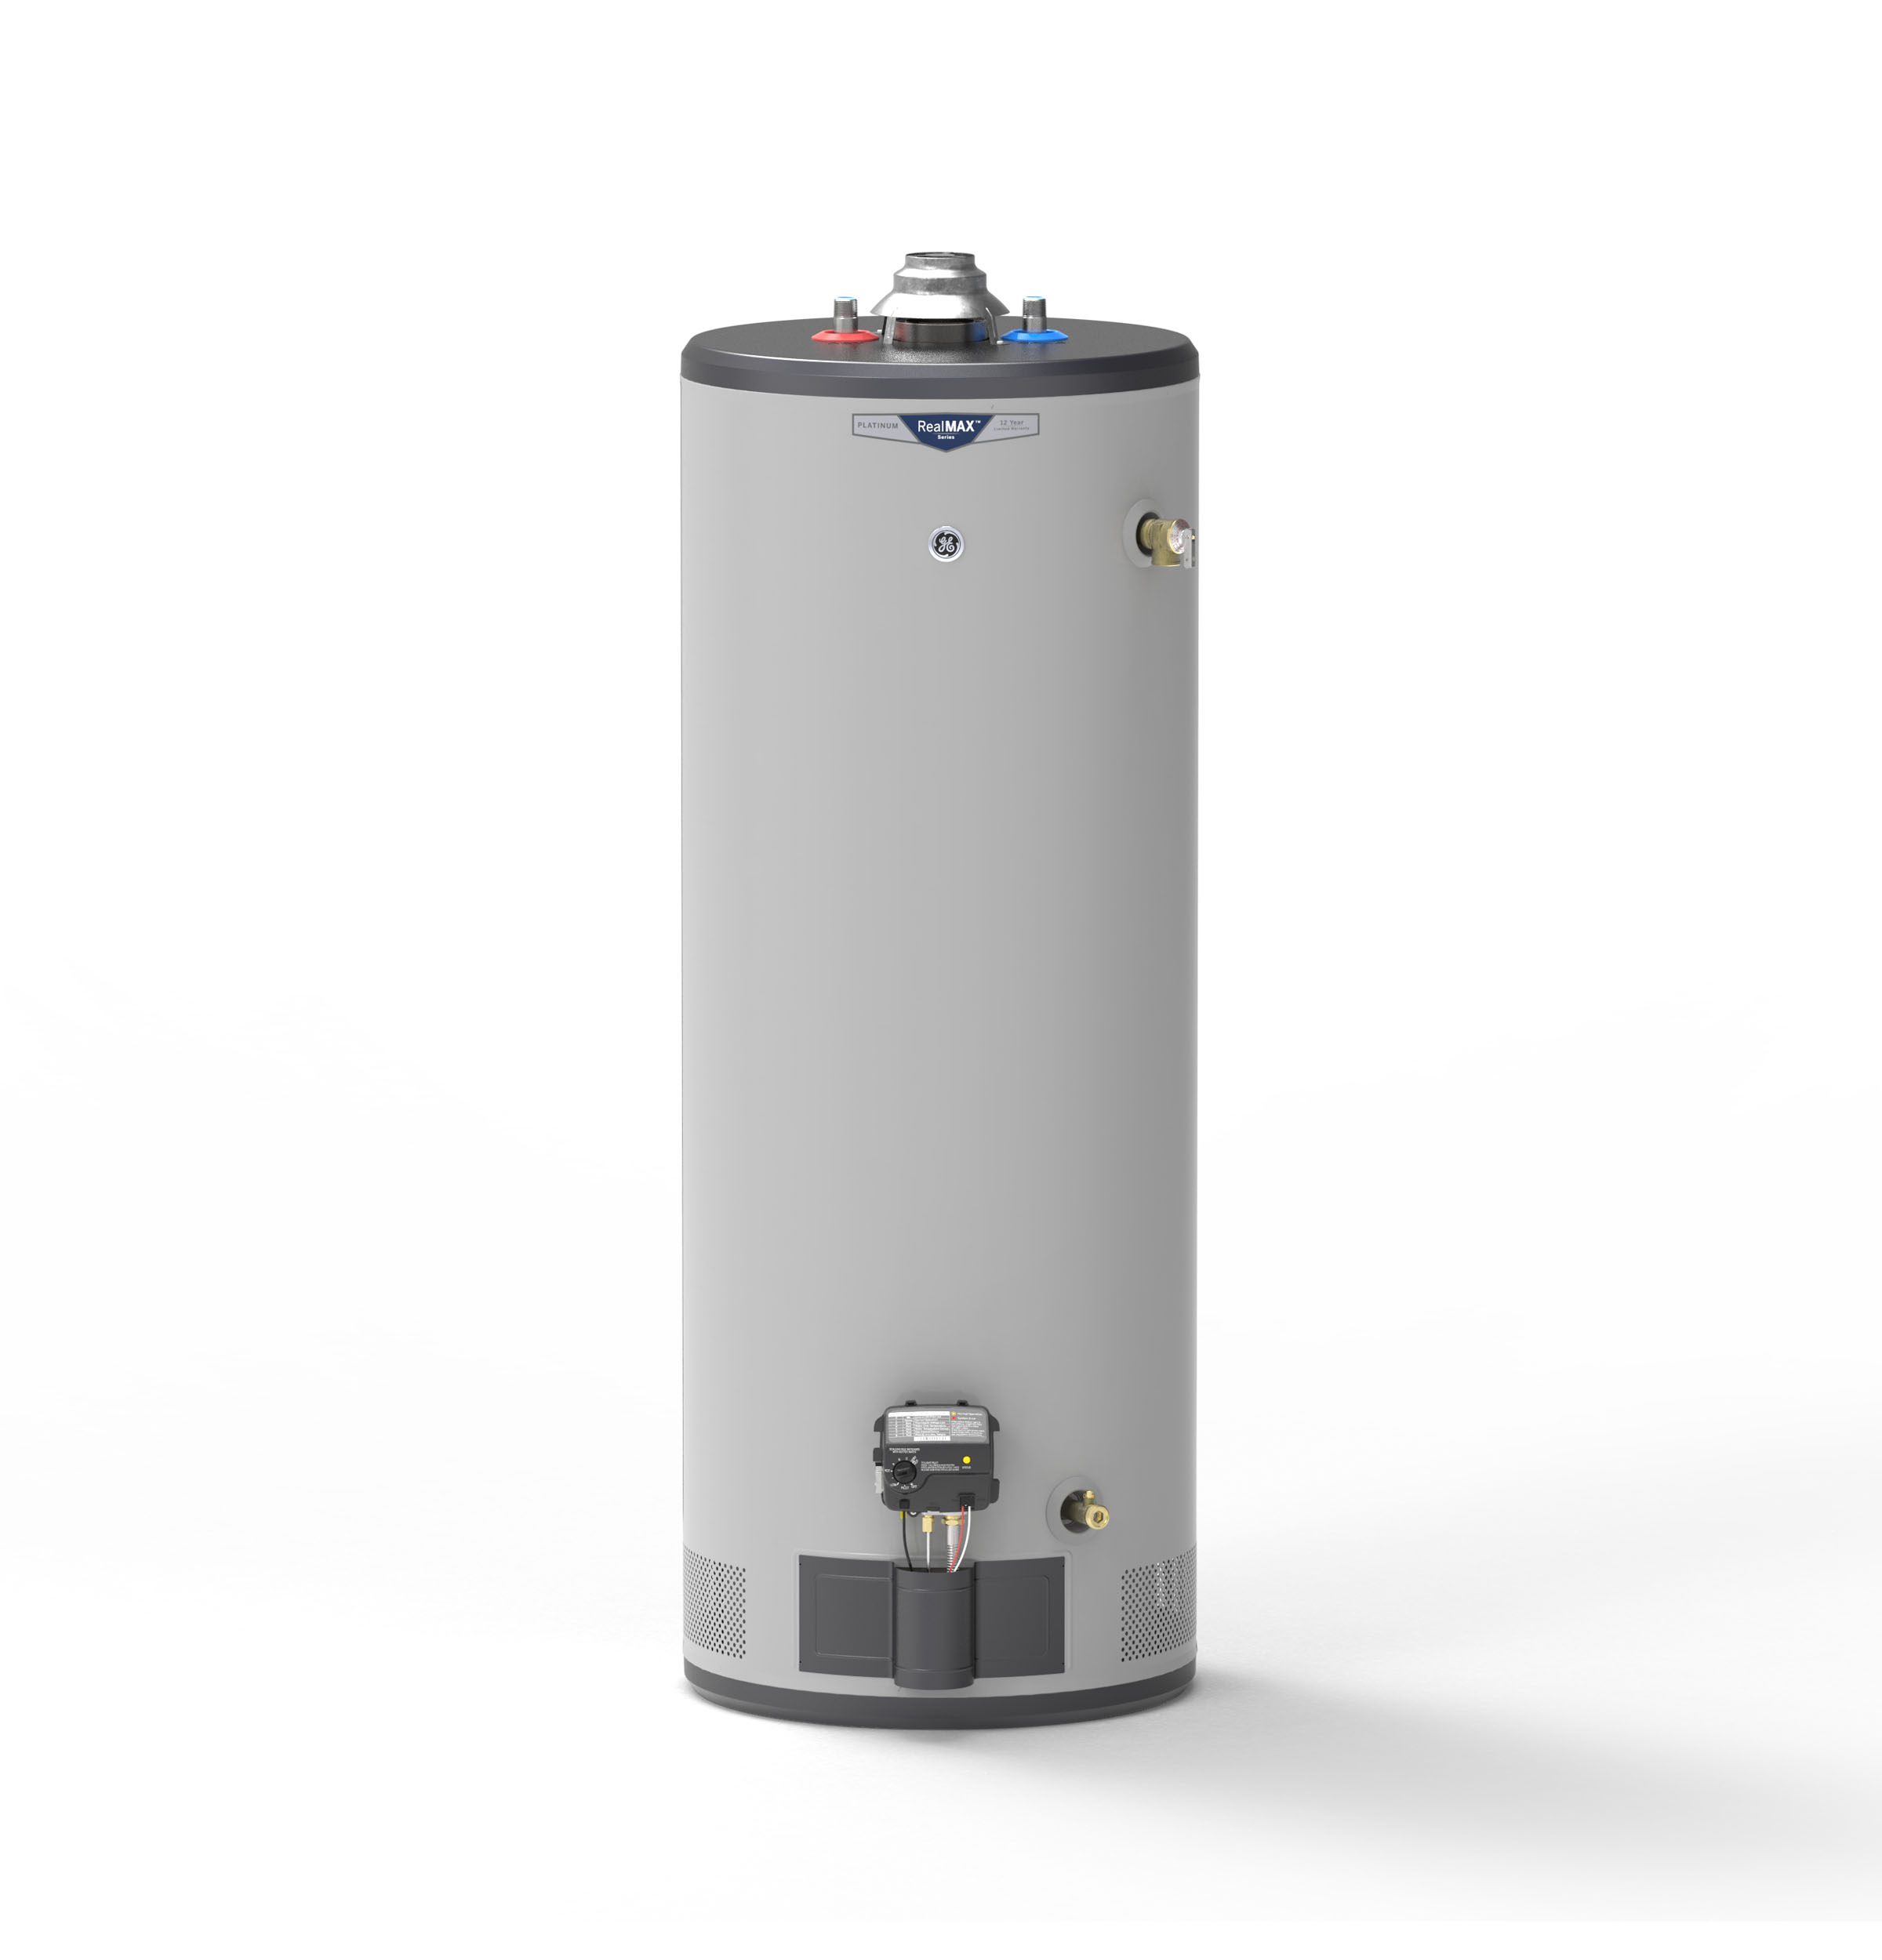 GE GG40T12BXR 40 Gallon, RealMAX Platinum Tall Atmospheric Vent Water Heater - Natural Gas - 12 Year Warranty